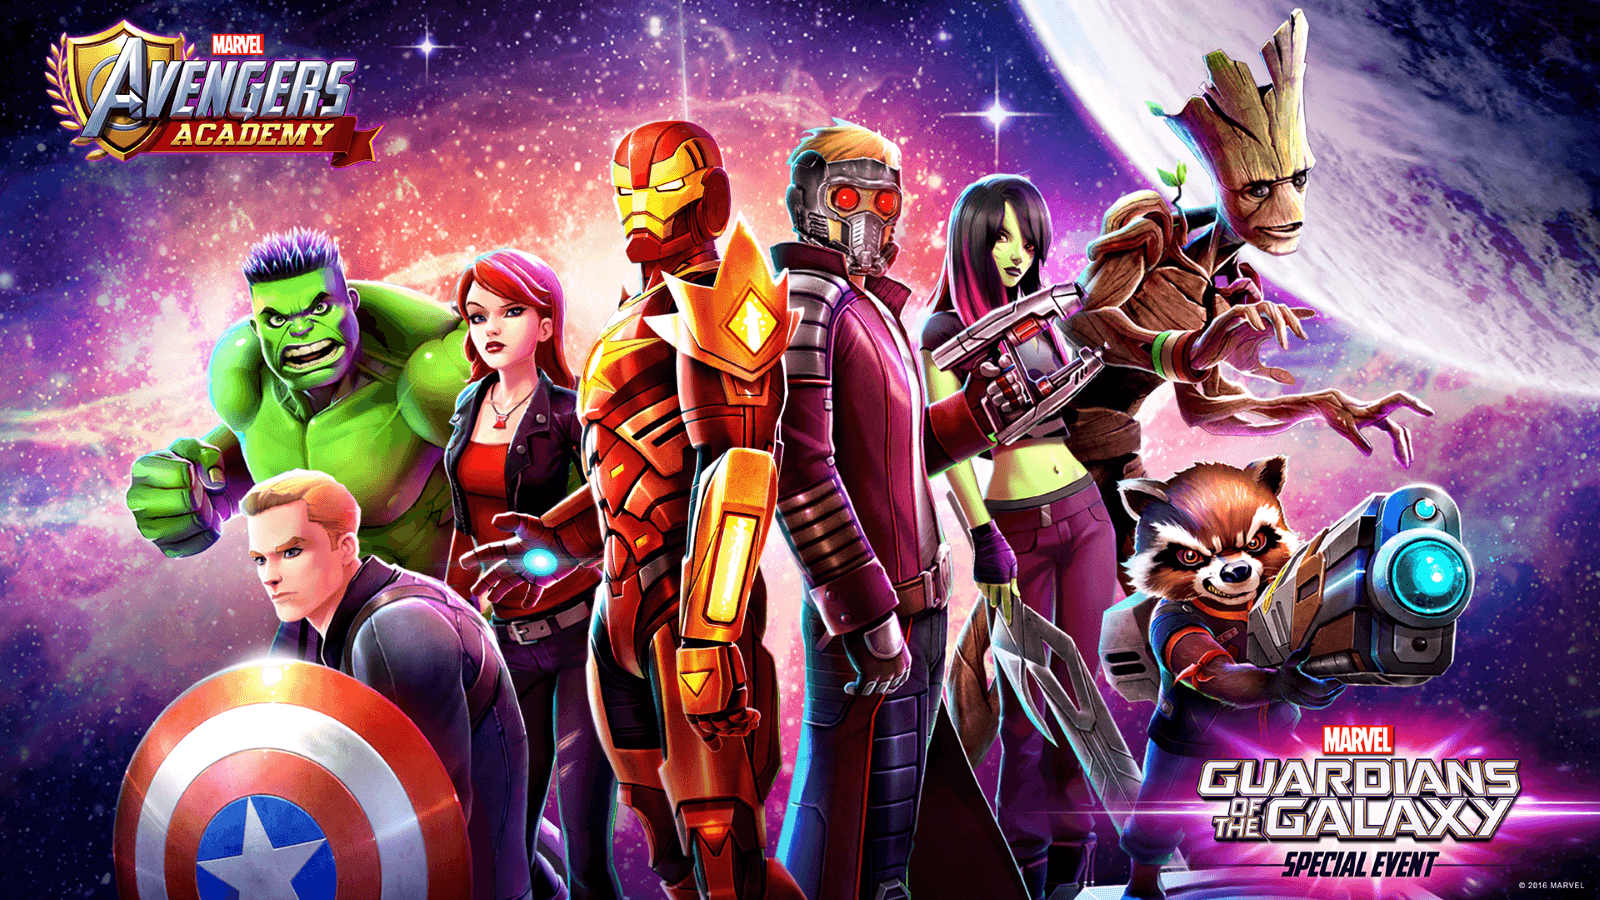 Marvel Avengers Academy Hosts Guardians of the Galaxy Event